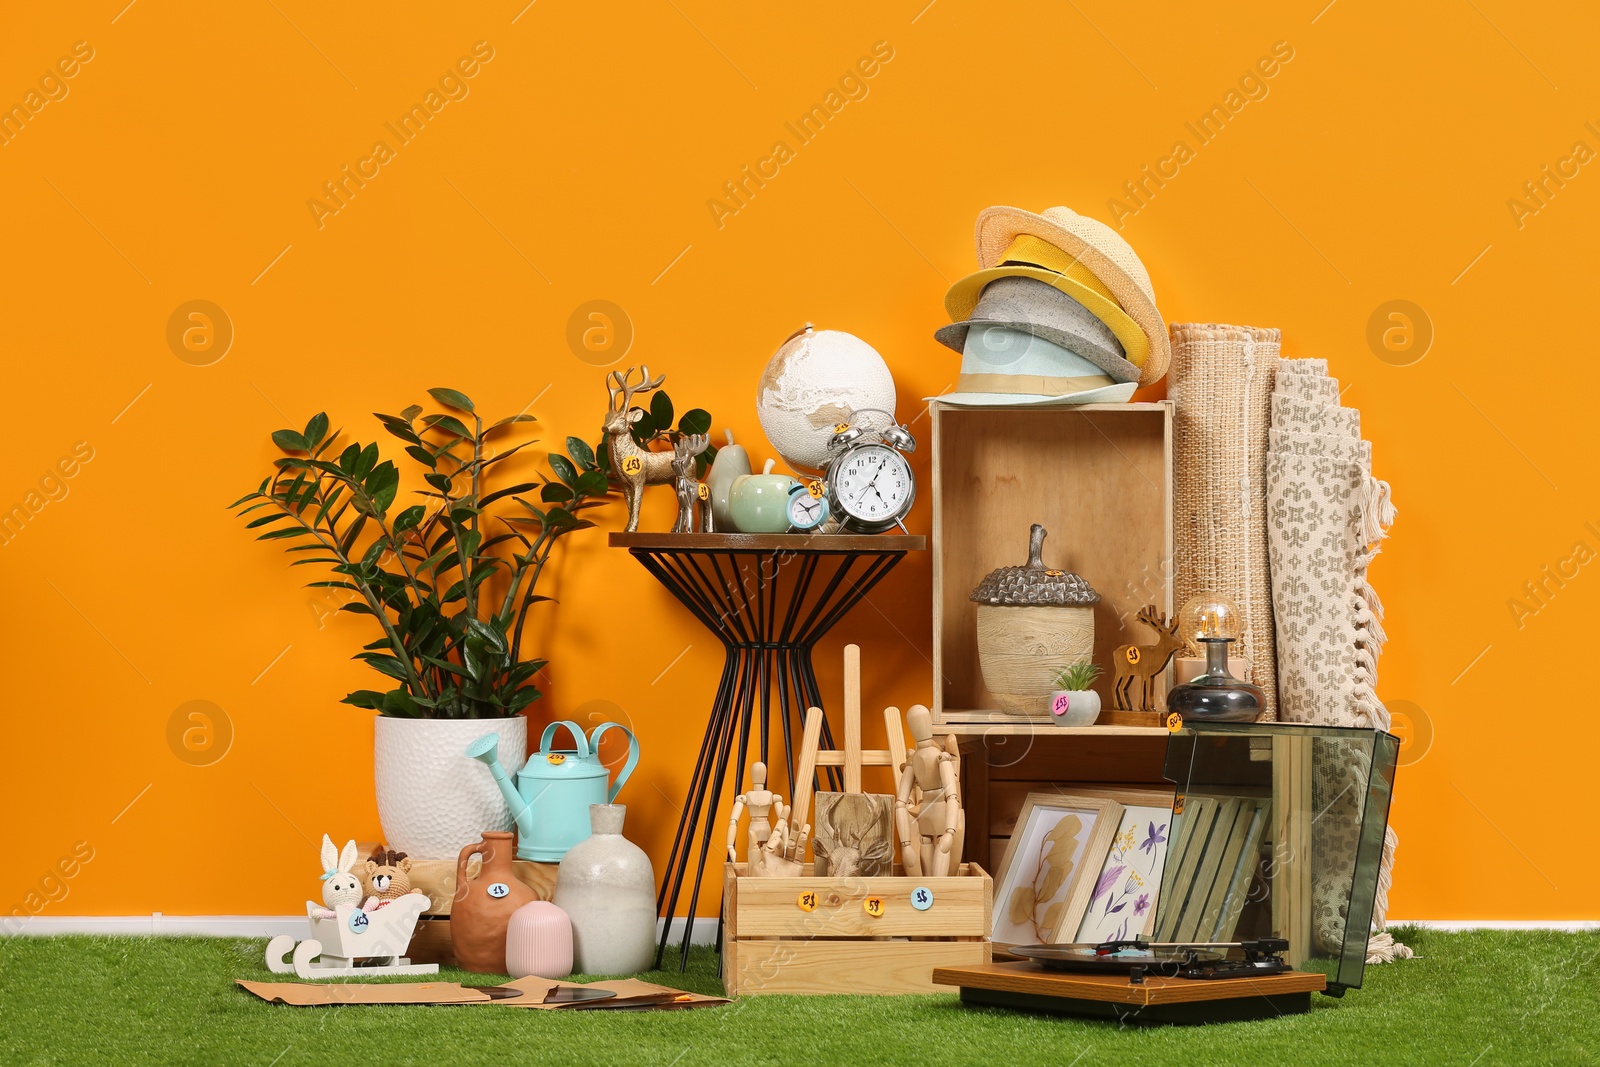 Photo of Many different items near orange wall in room. Garage sale